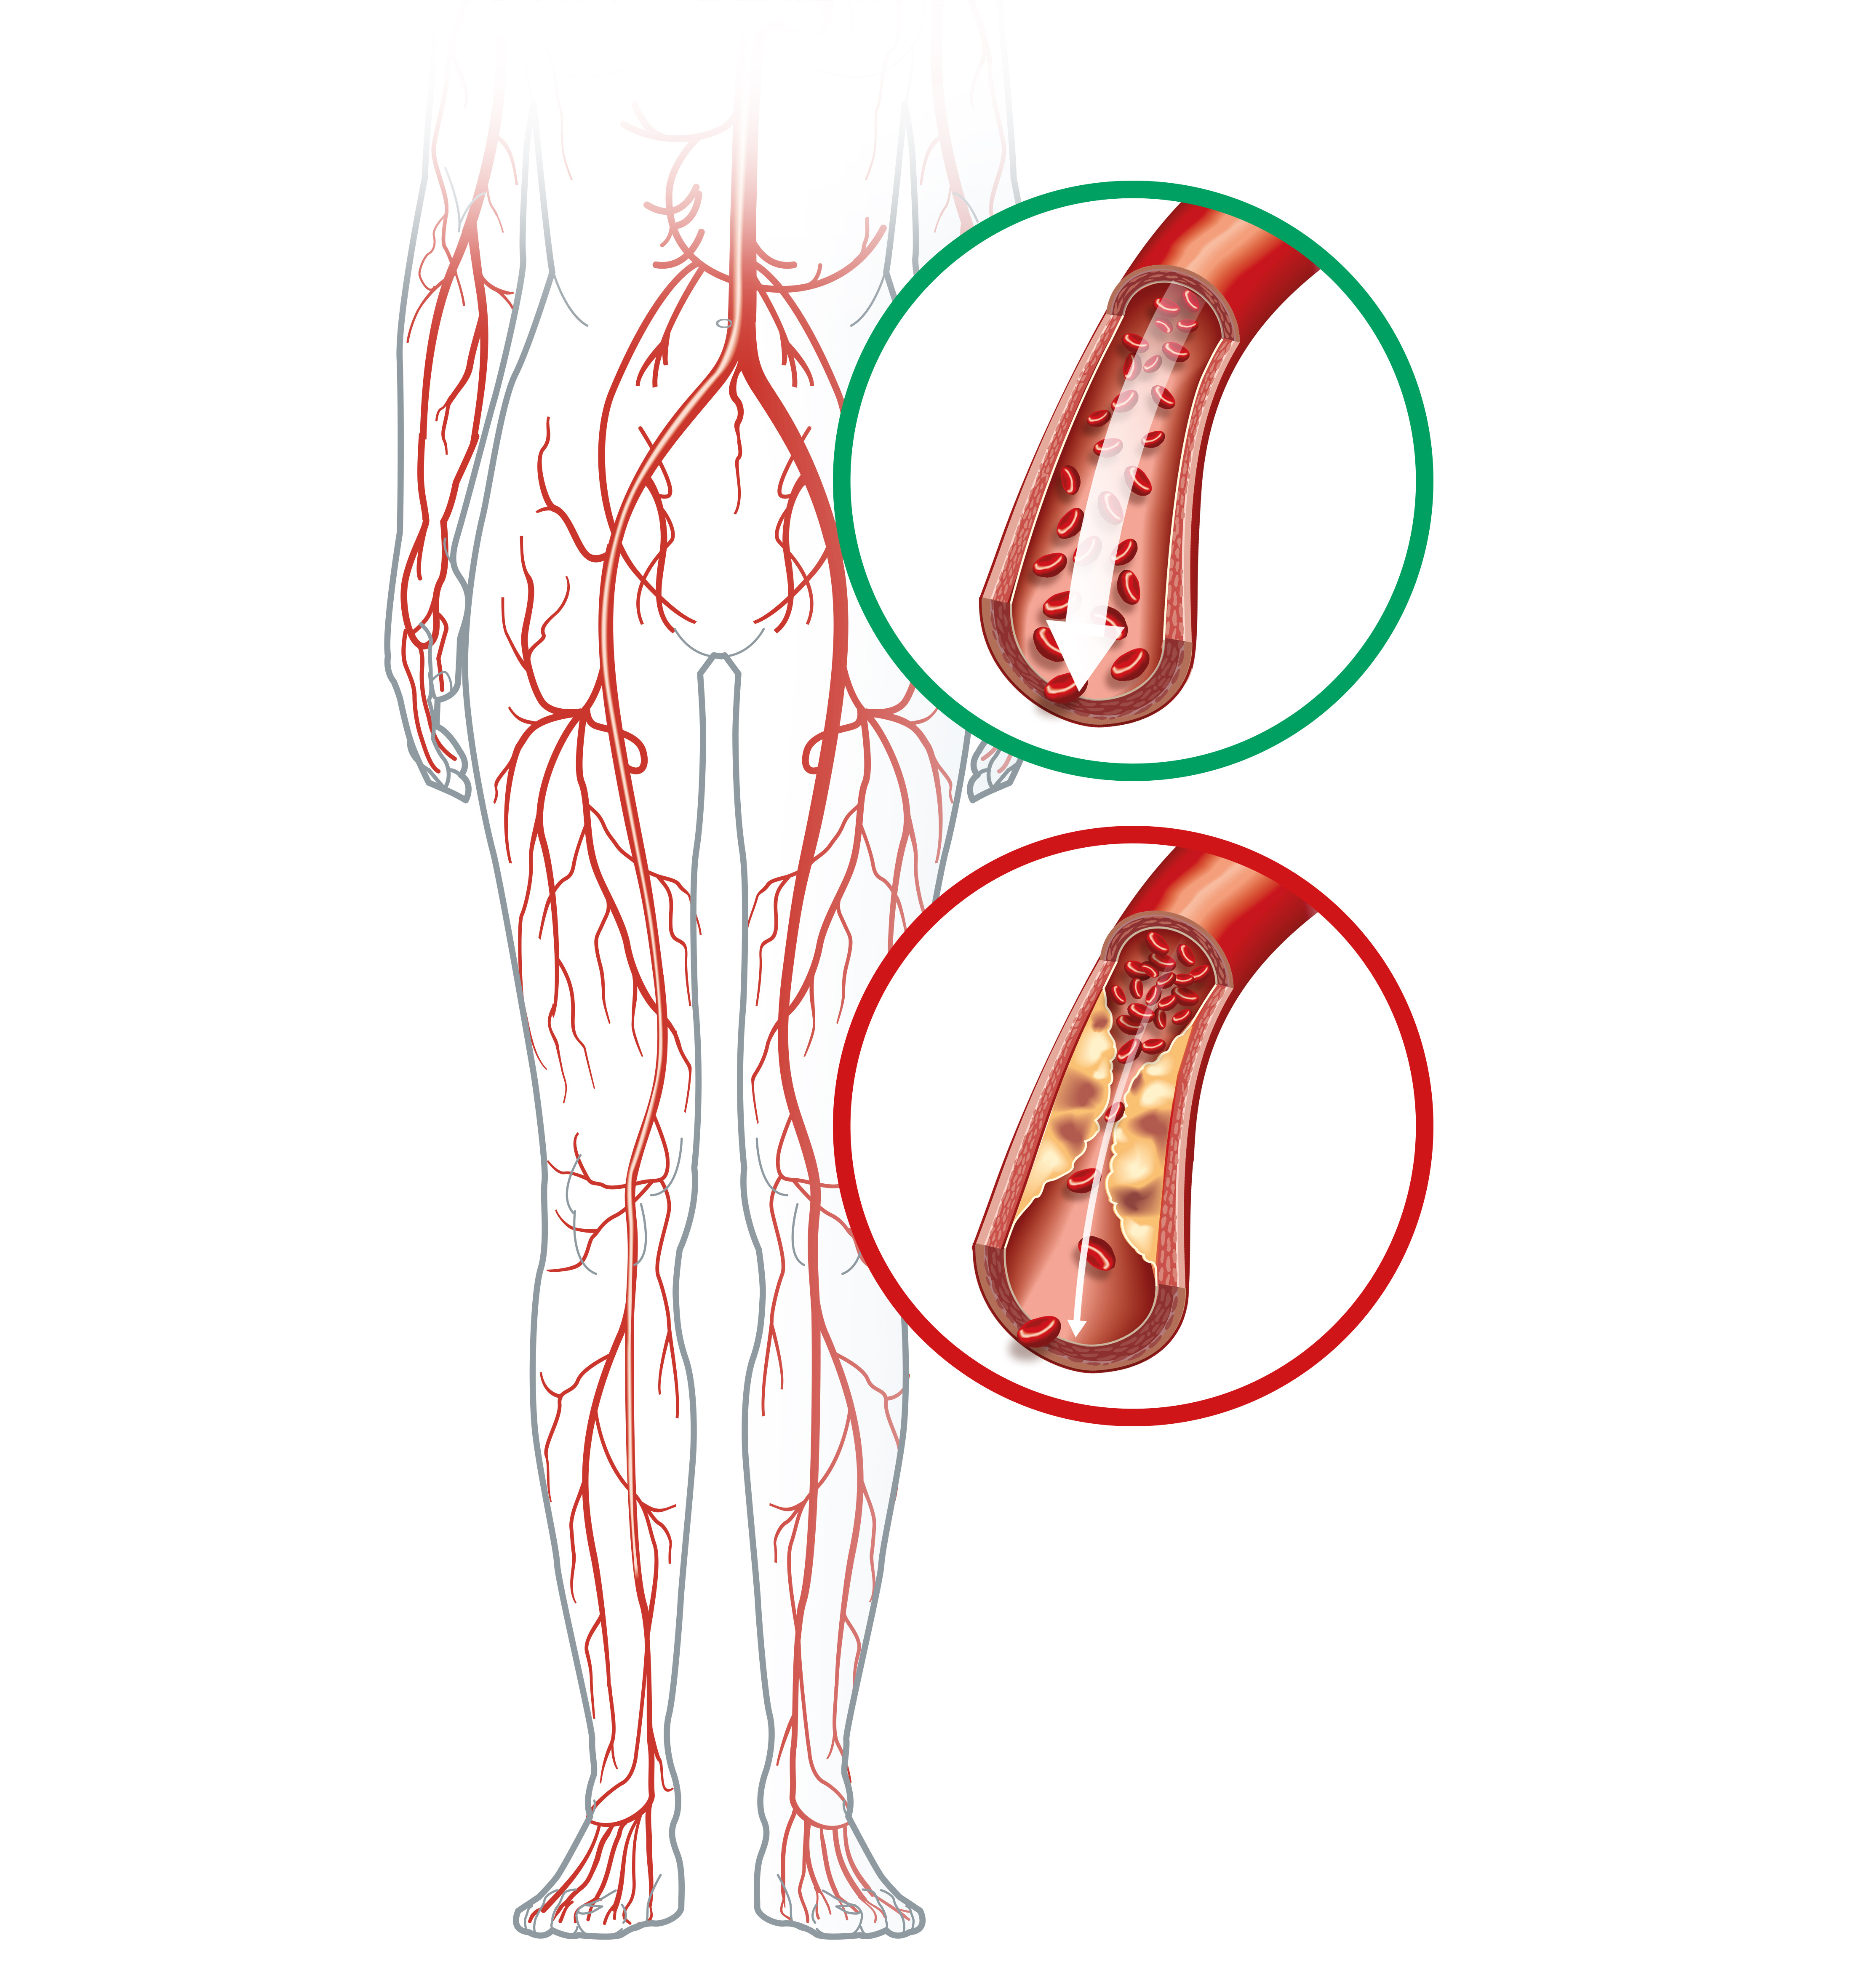 Illustration showing healthy artery and arterioslerotic artery, peripheral artery occlusive disease.